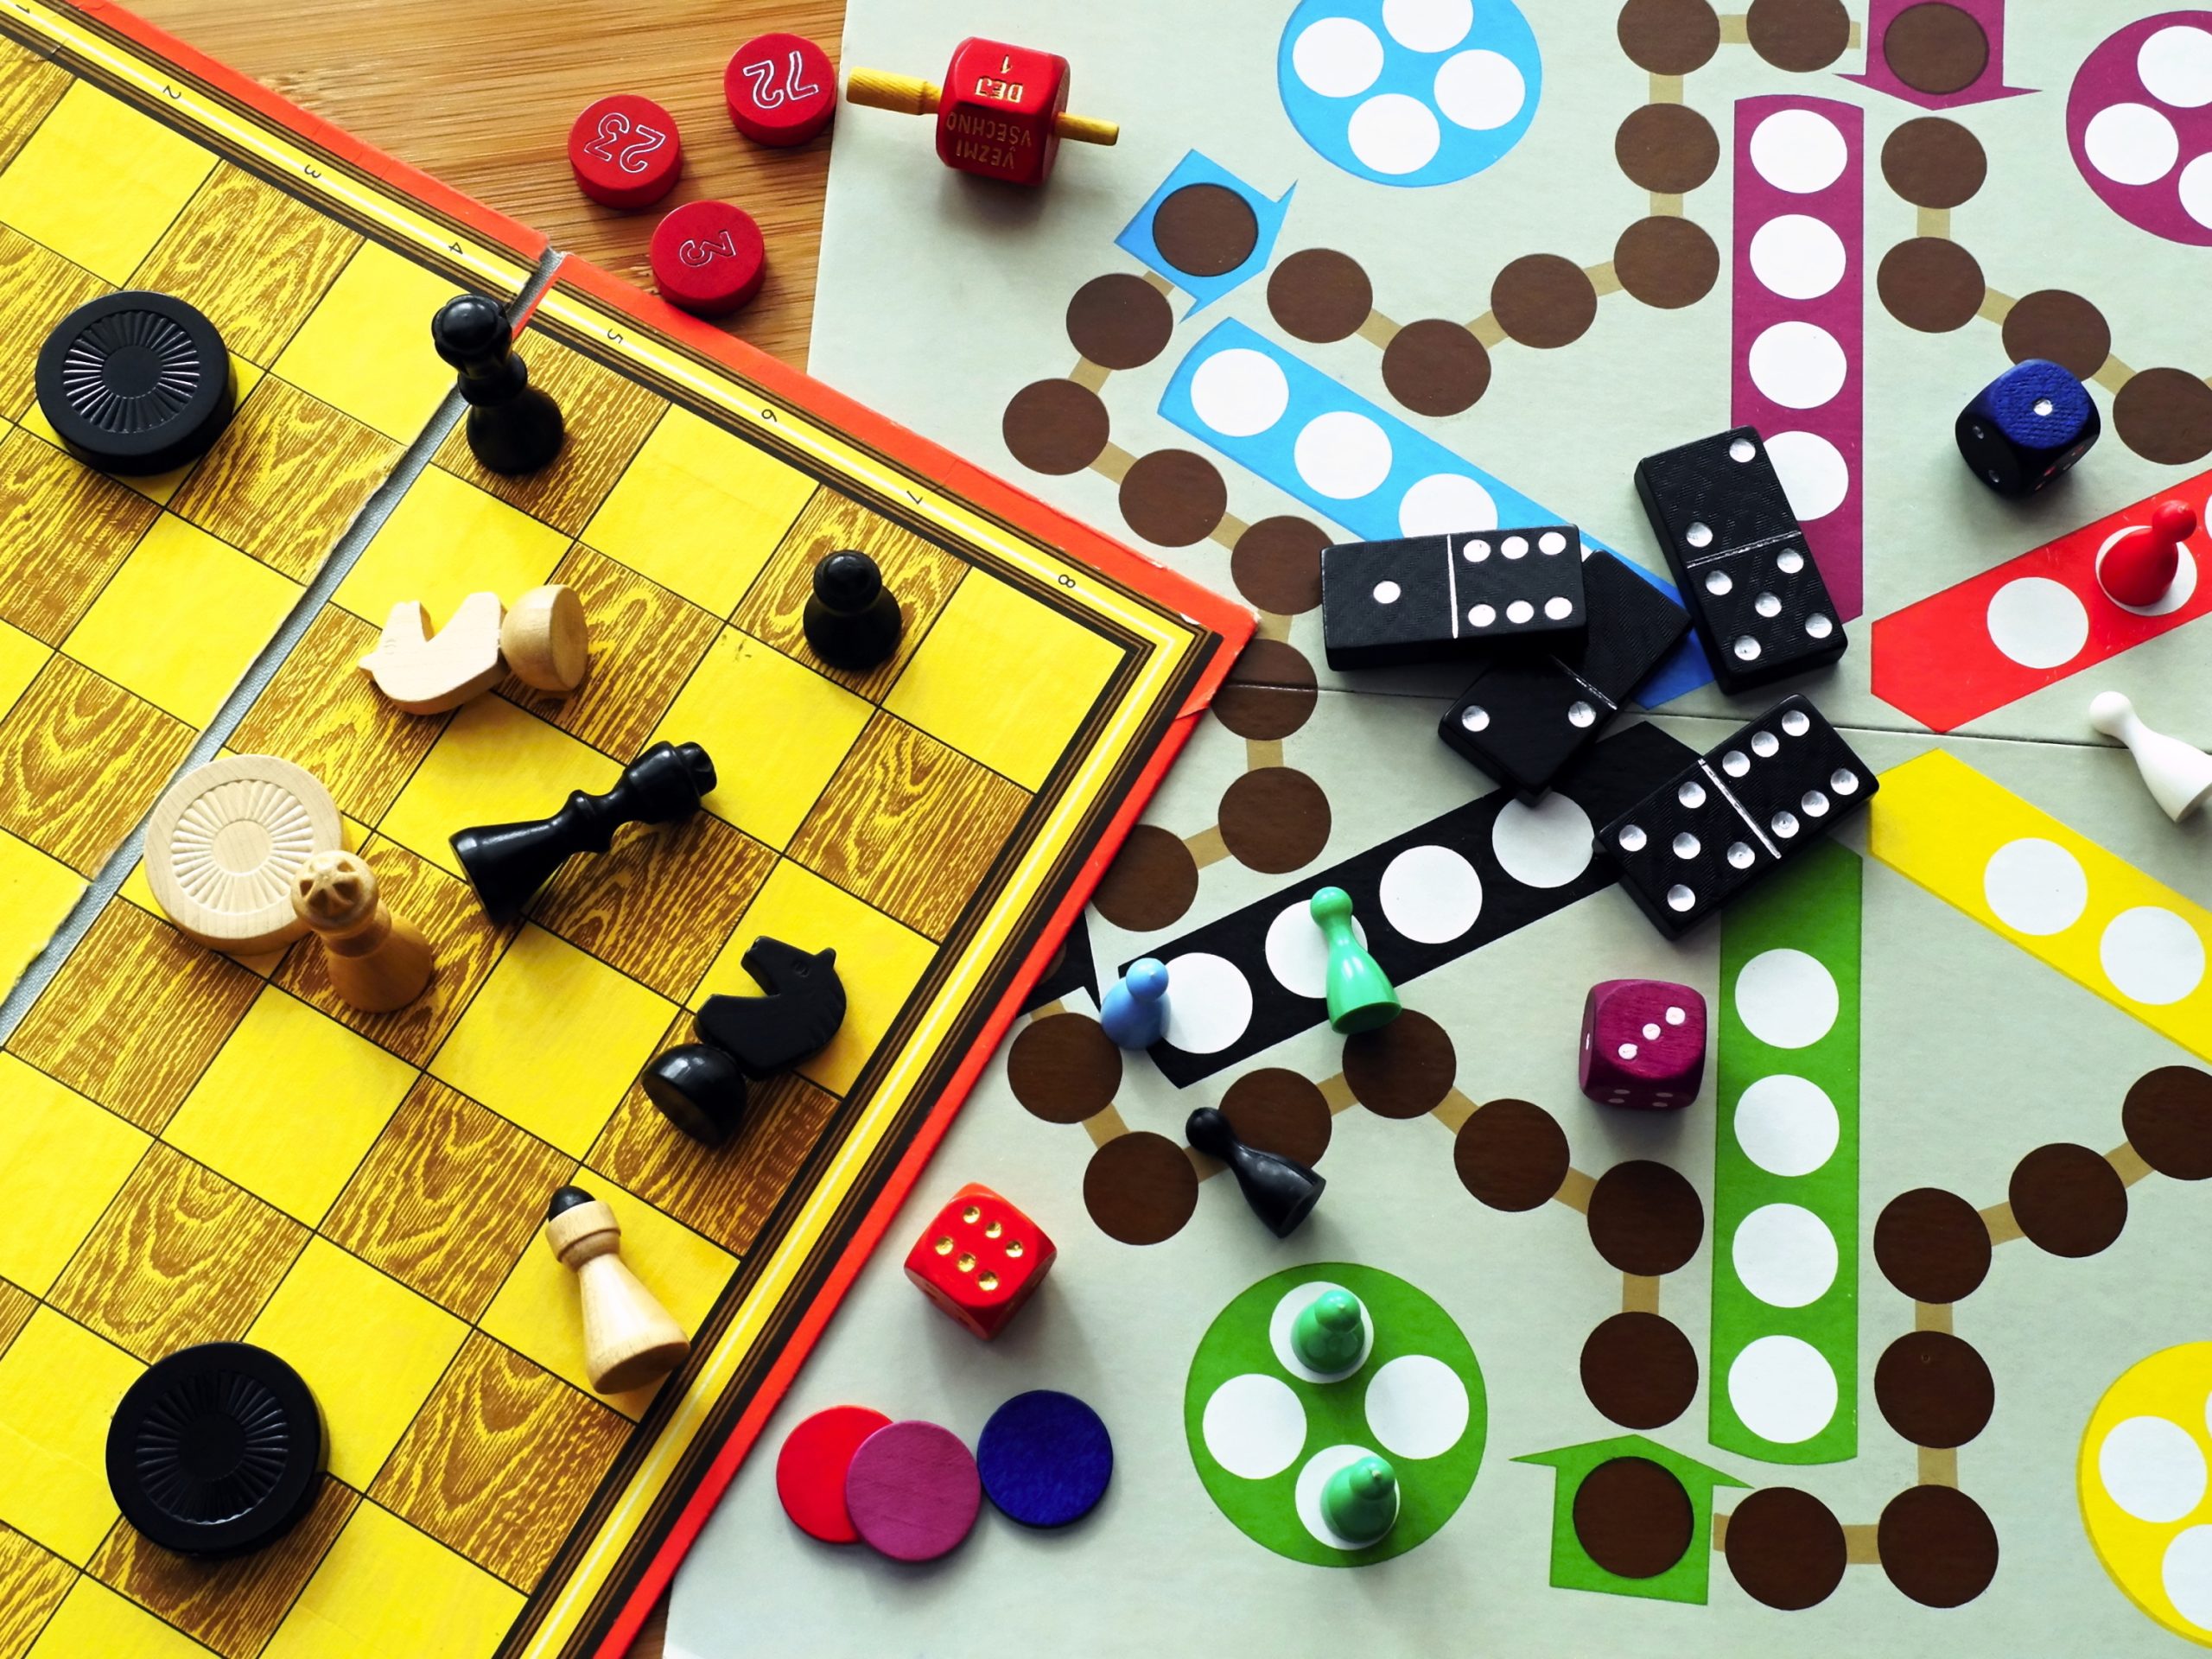 A variety of board games and blocks are arranged on a wooden table including chess, checkers, dominoes, and a spinner.